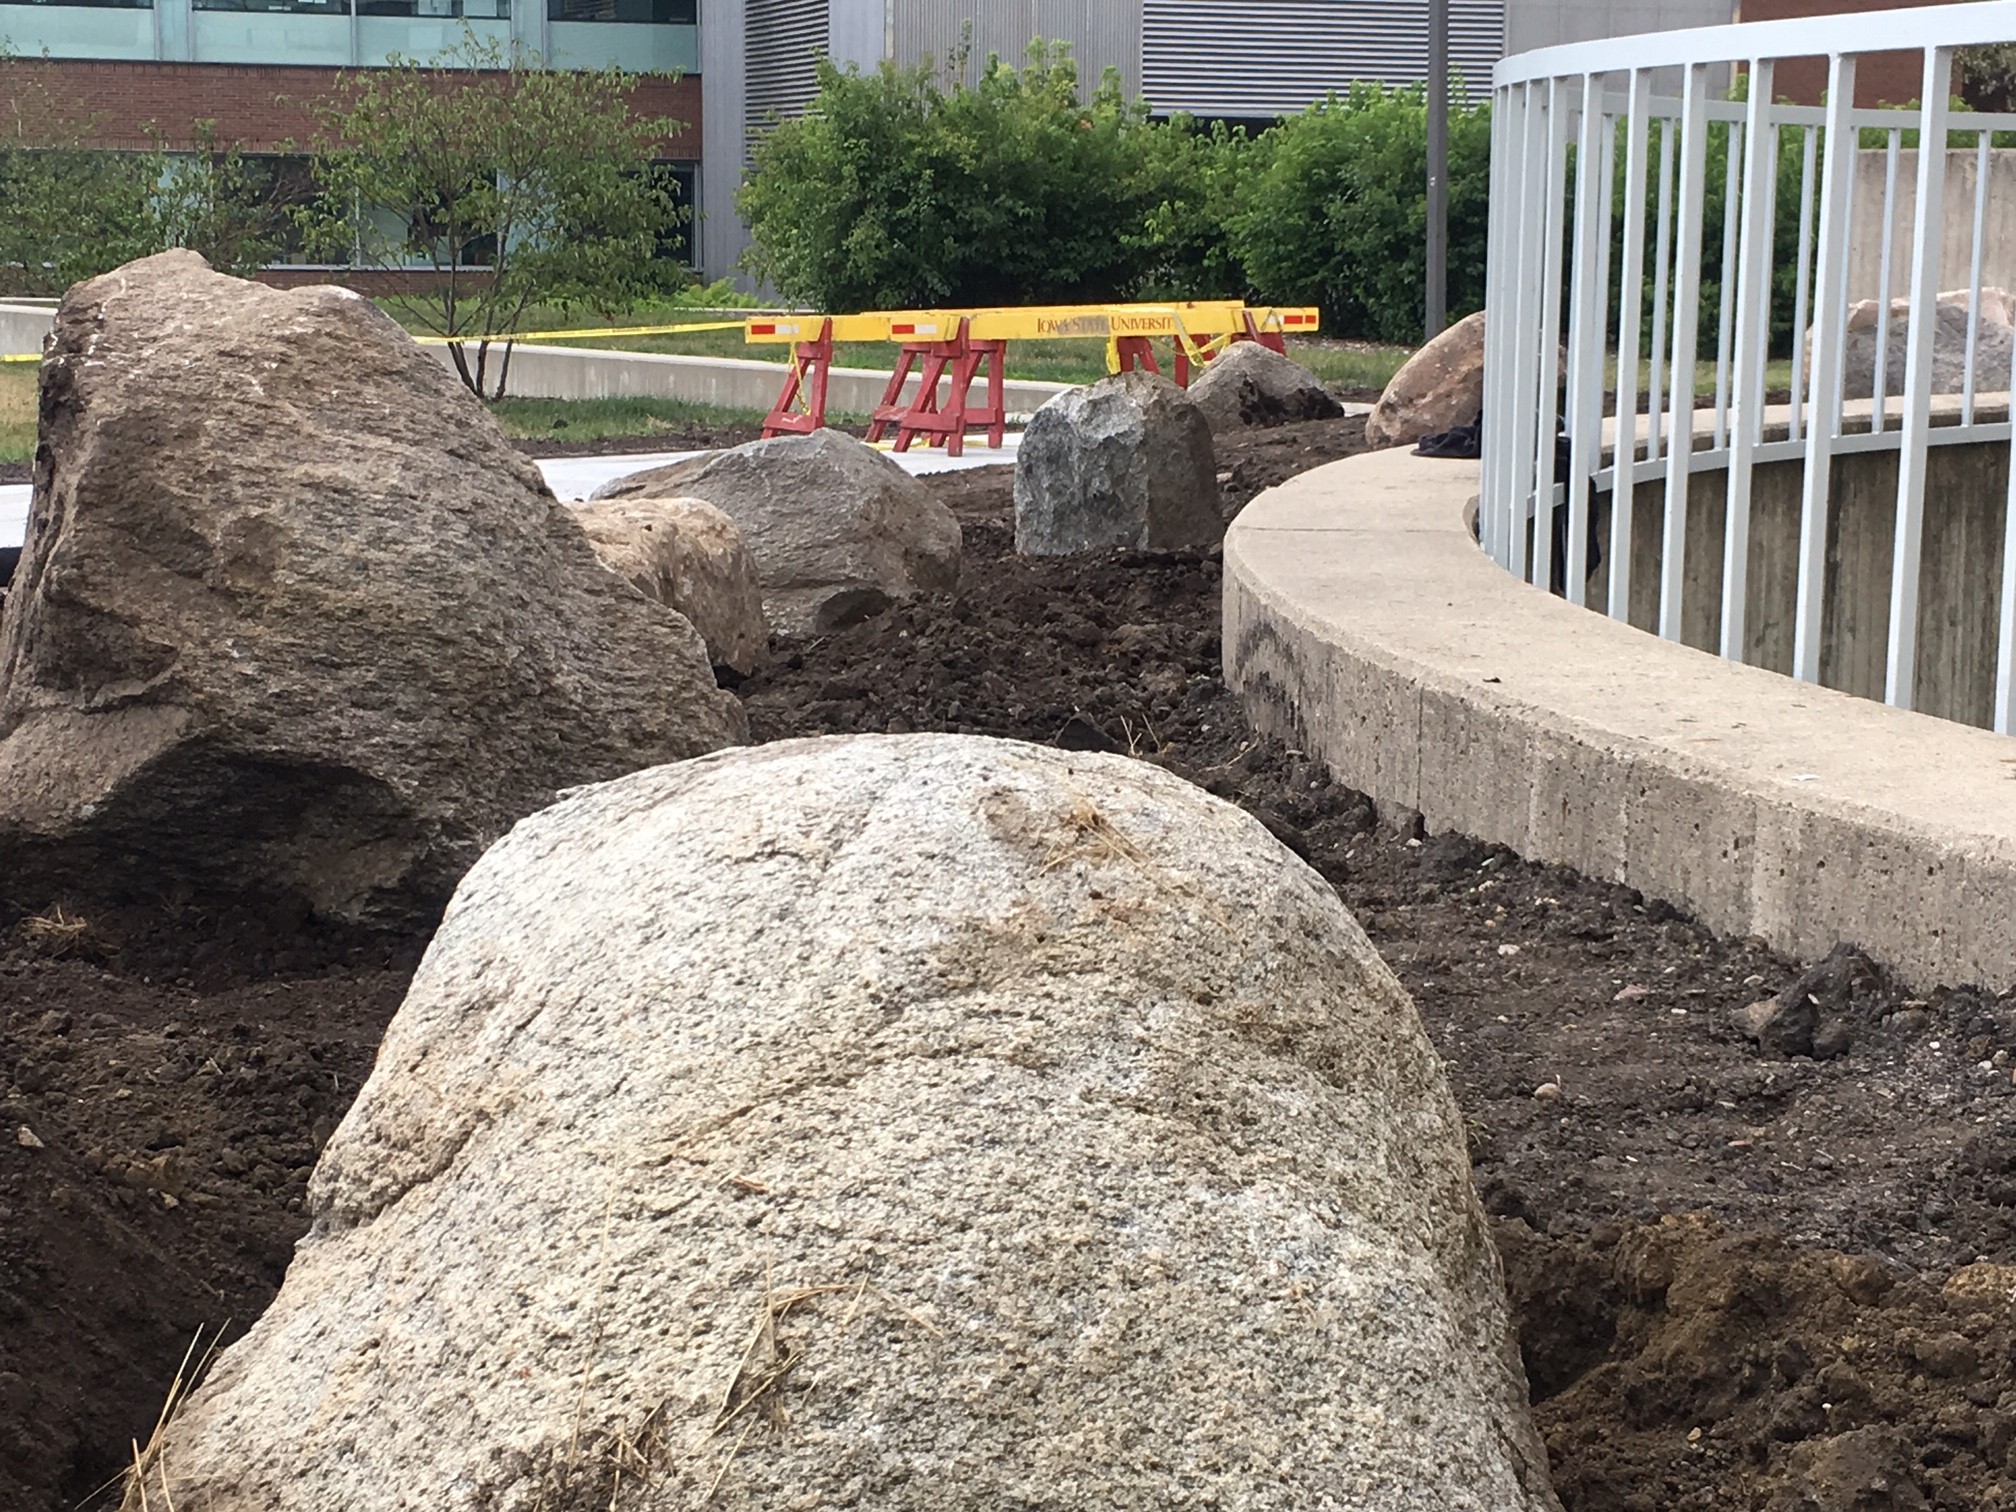 Fifteen large field boulders were placed throughout the new entrance plaza to serve as informal seating and provide visual interest. Eight boulders are arranged in a curve around the circular opening for the staircase.